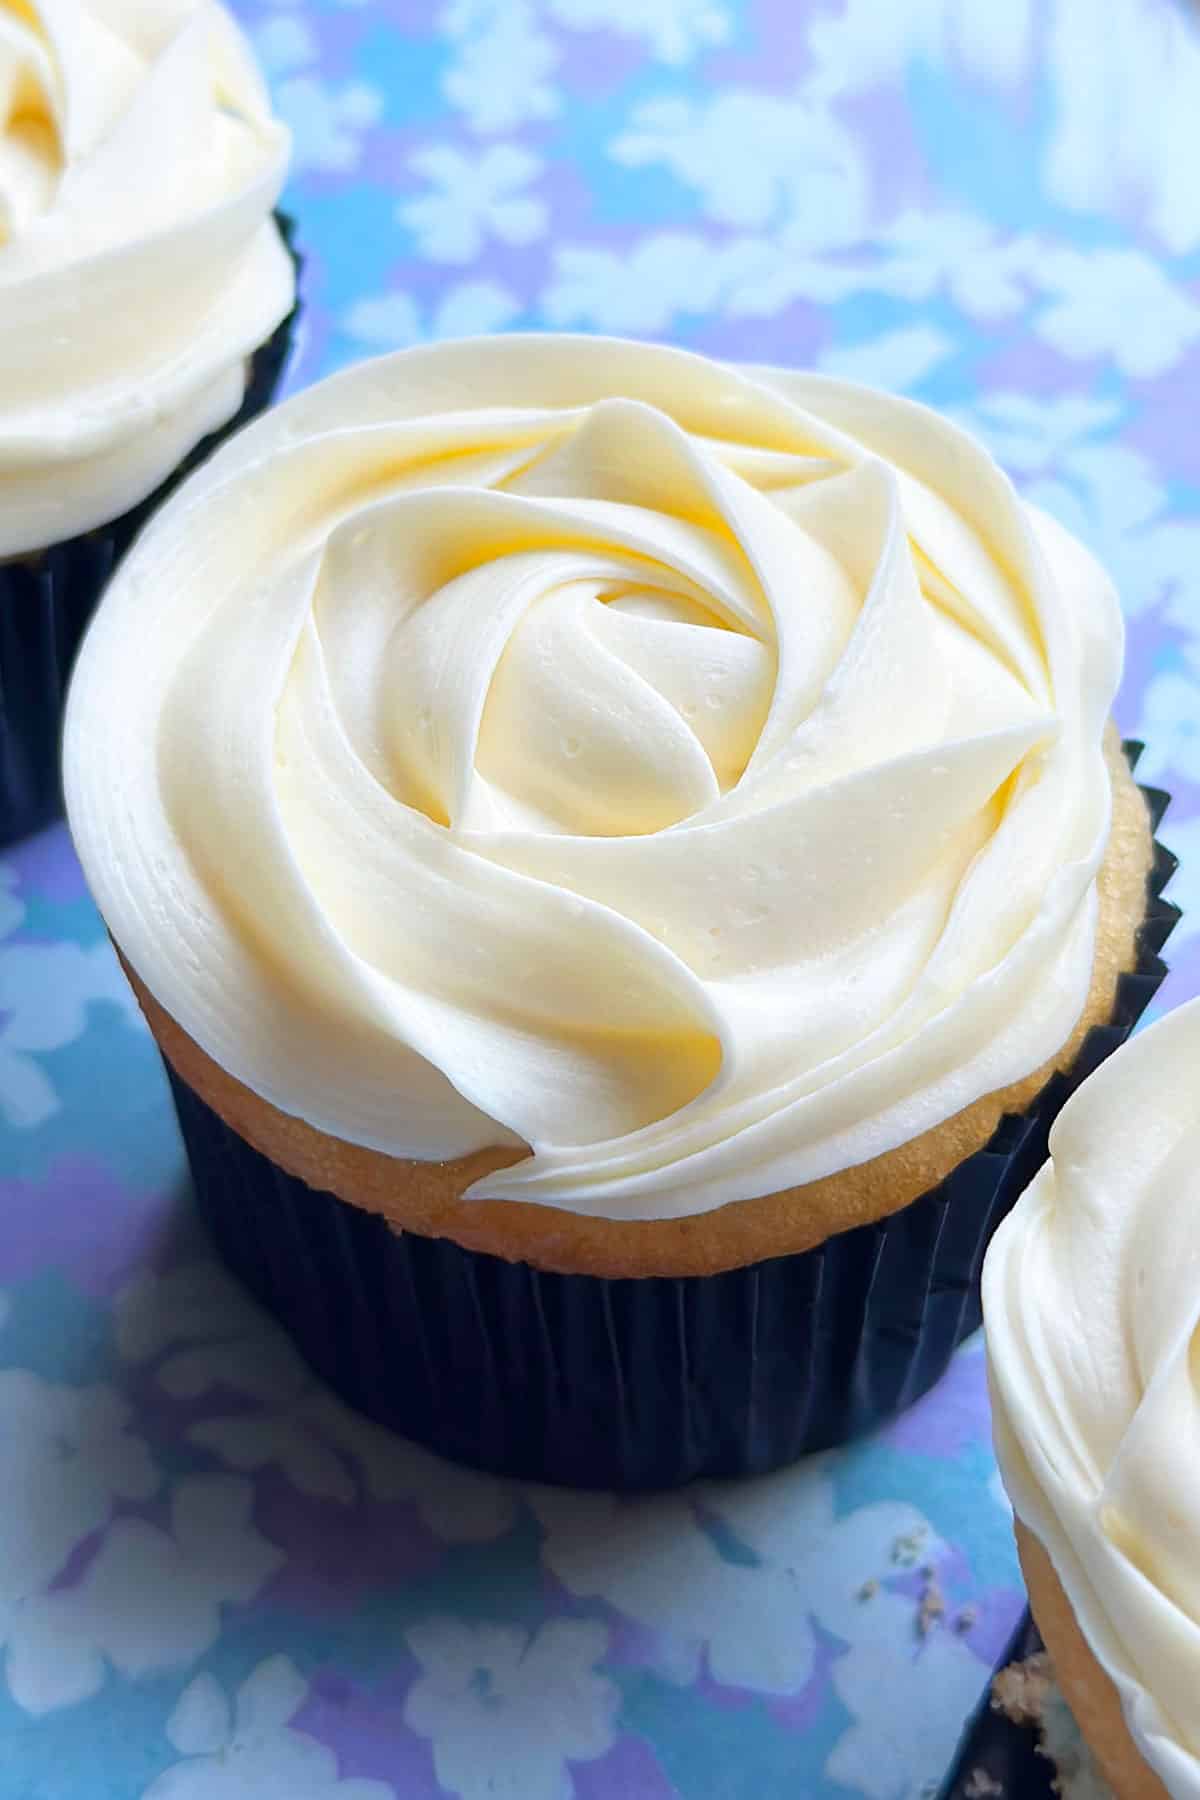 Easy Almond Buttercream Frosting Piped on Top of Cupcake on Blue Background.